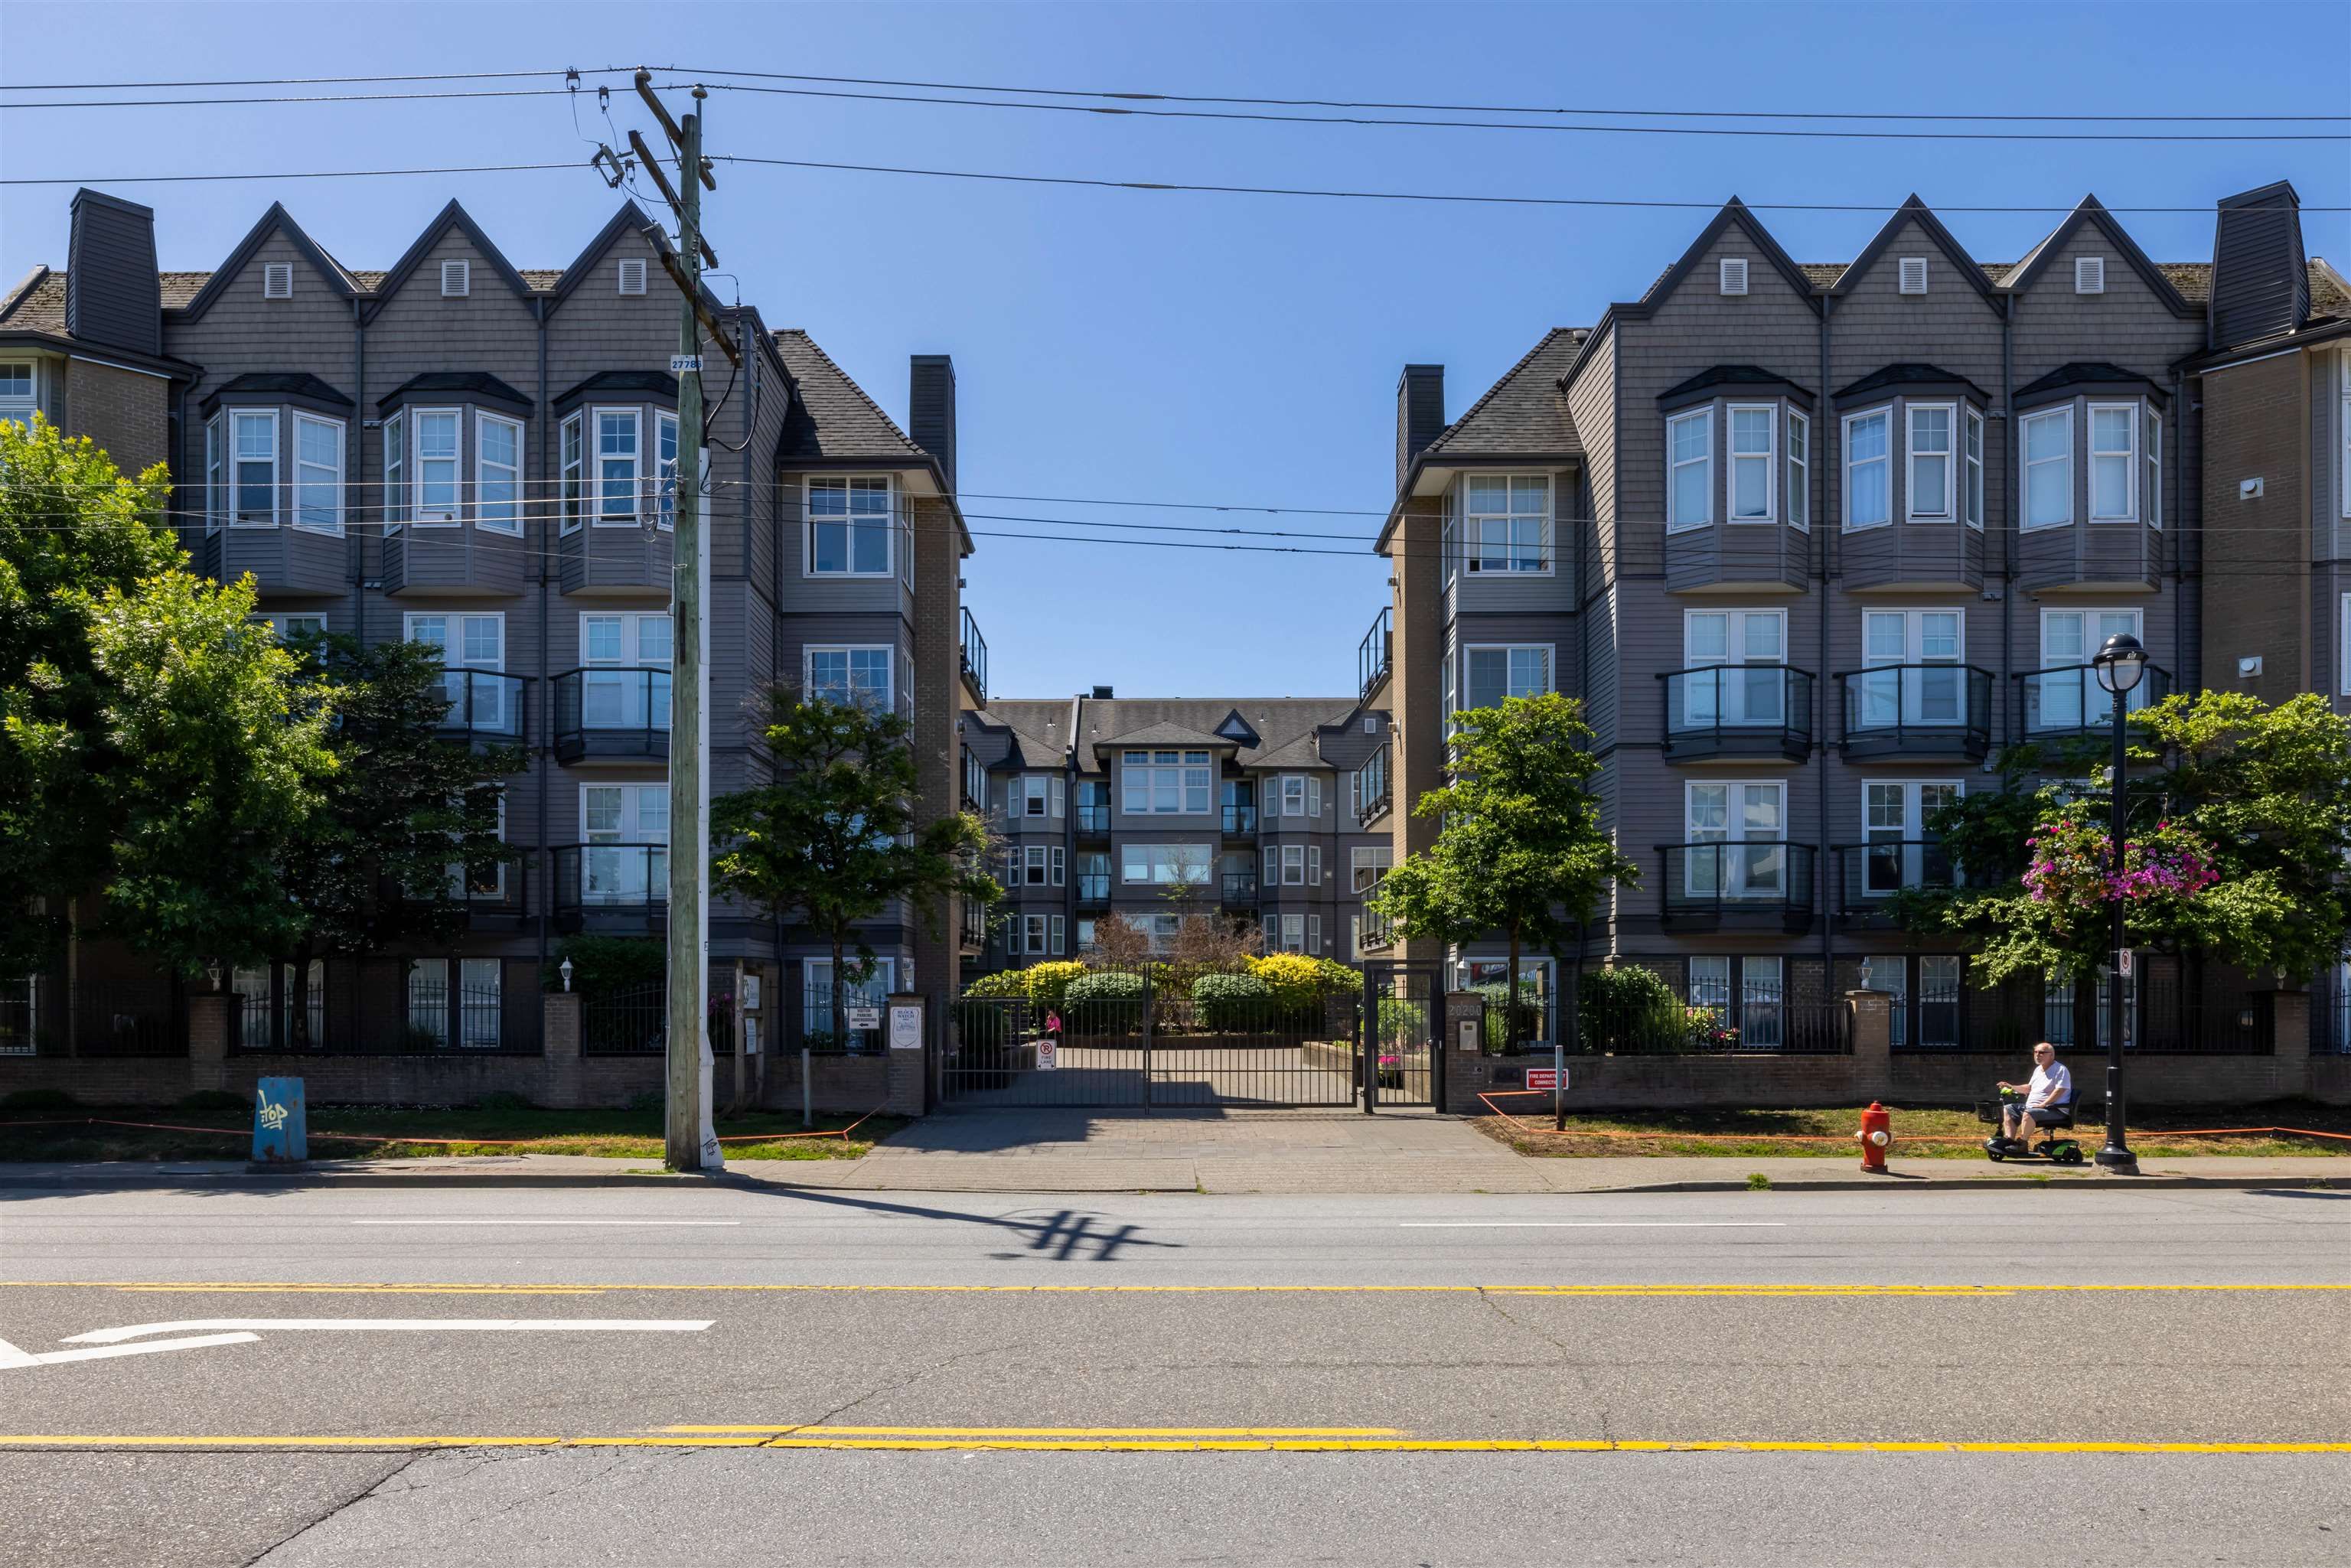 New property listed in Langley City, Langley